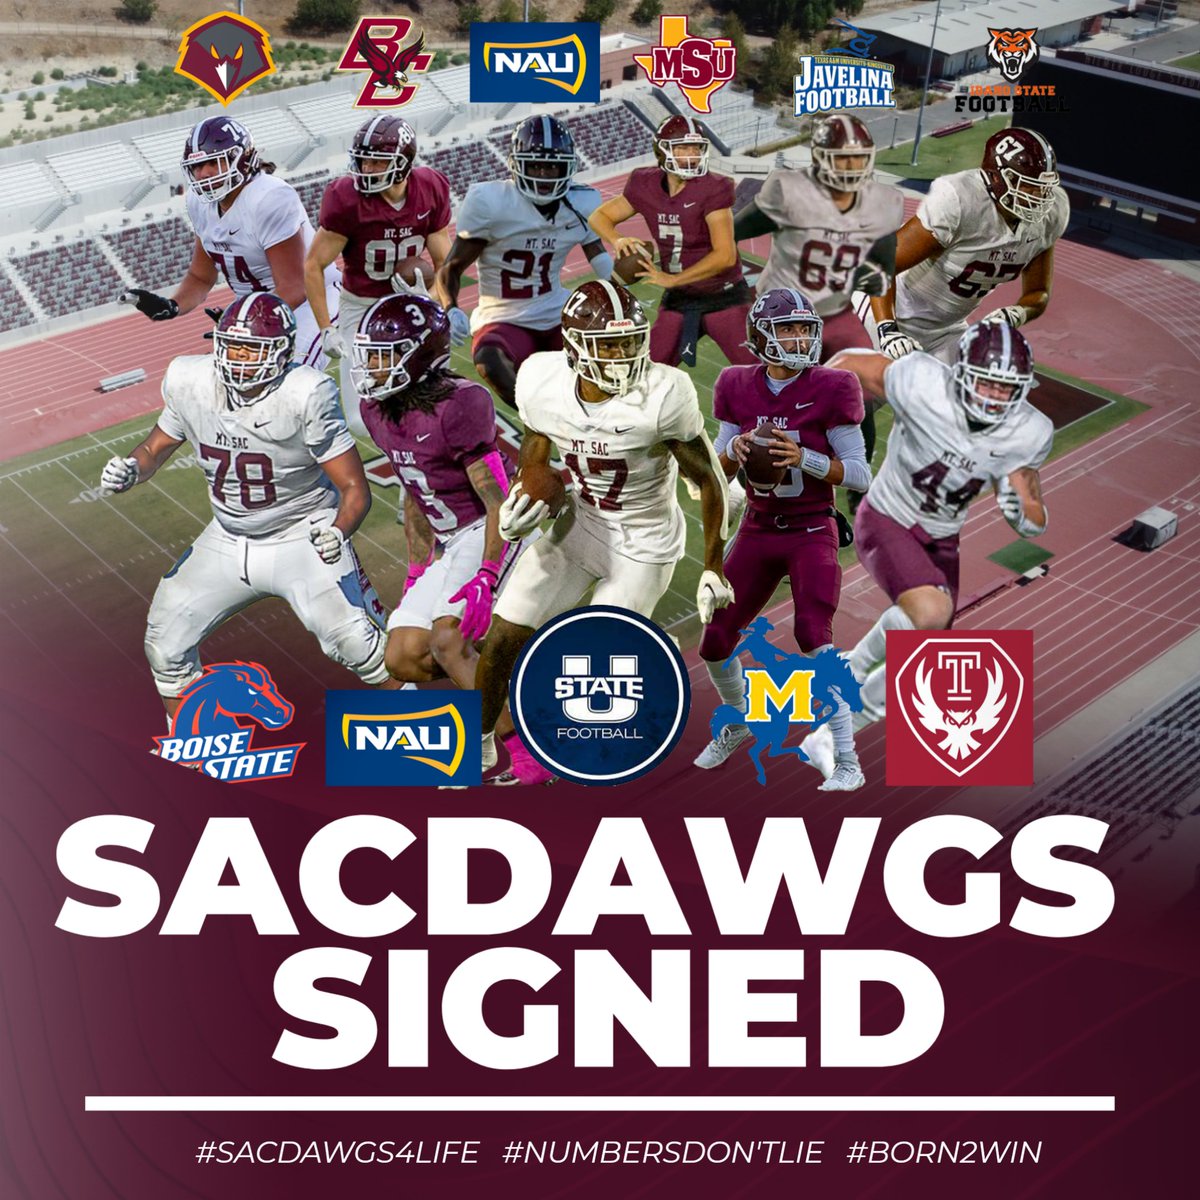 Congratulations 2 all our student-athletes who have signed already. 11 signed, 8 D1, 2 Freshmen Qualifiers, and we are not done yet. Still plenty of talented young men who will be signing soon. #NumbersDontLie #MountieUp #SACDAWGNATION #Born2Win #AIE #SACDAWGS4LIFE